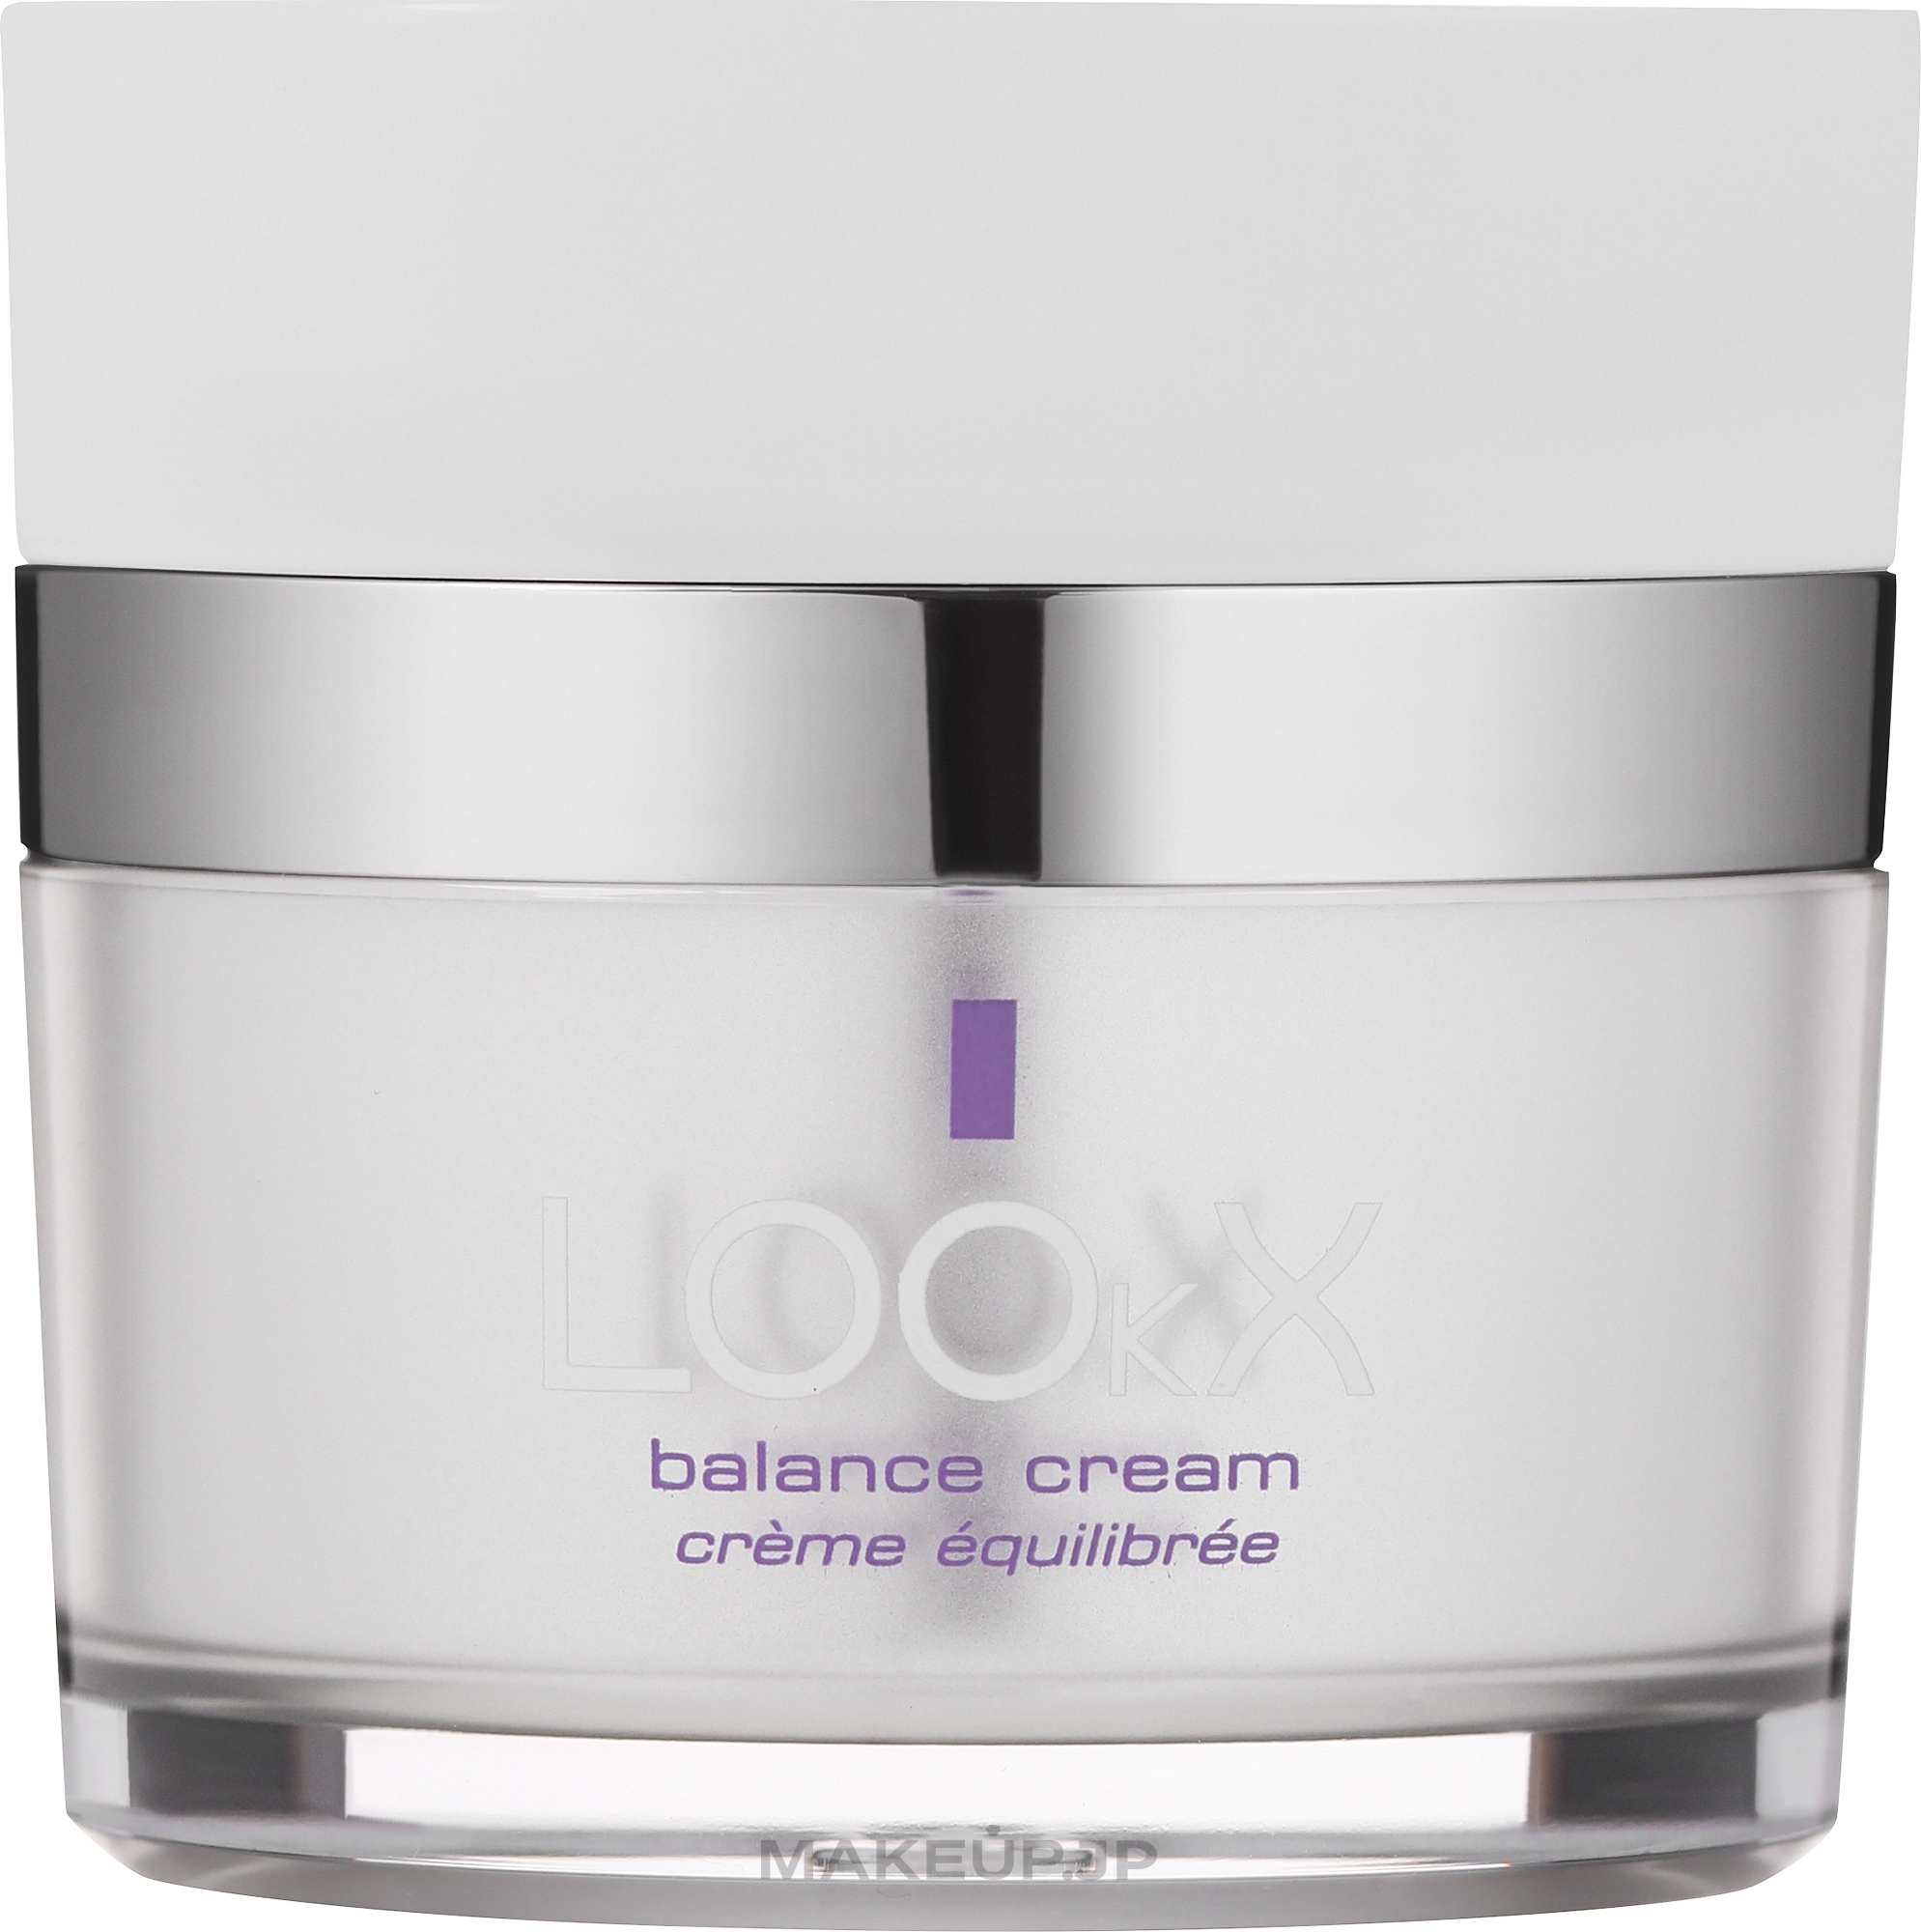 Balancing Face cream for All Types of Skin - LOOkX Balance Cream — photo 50 ml